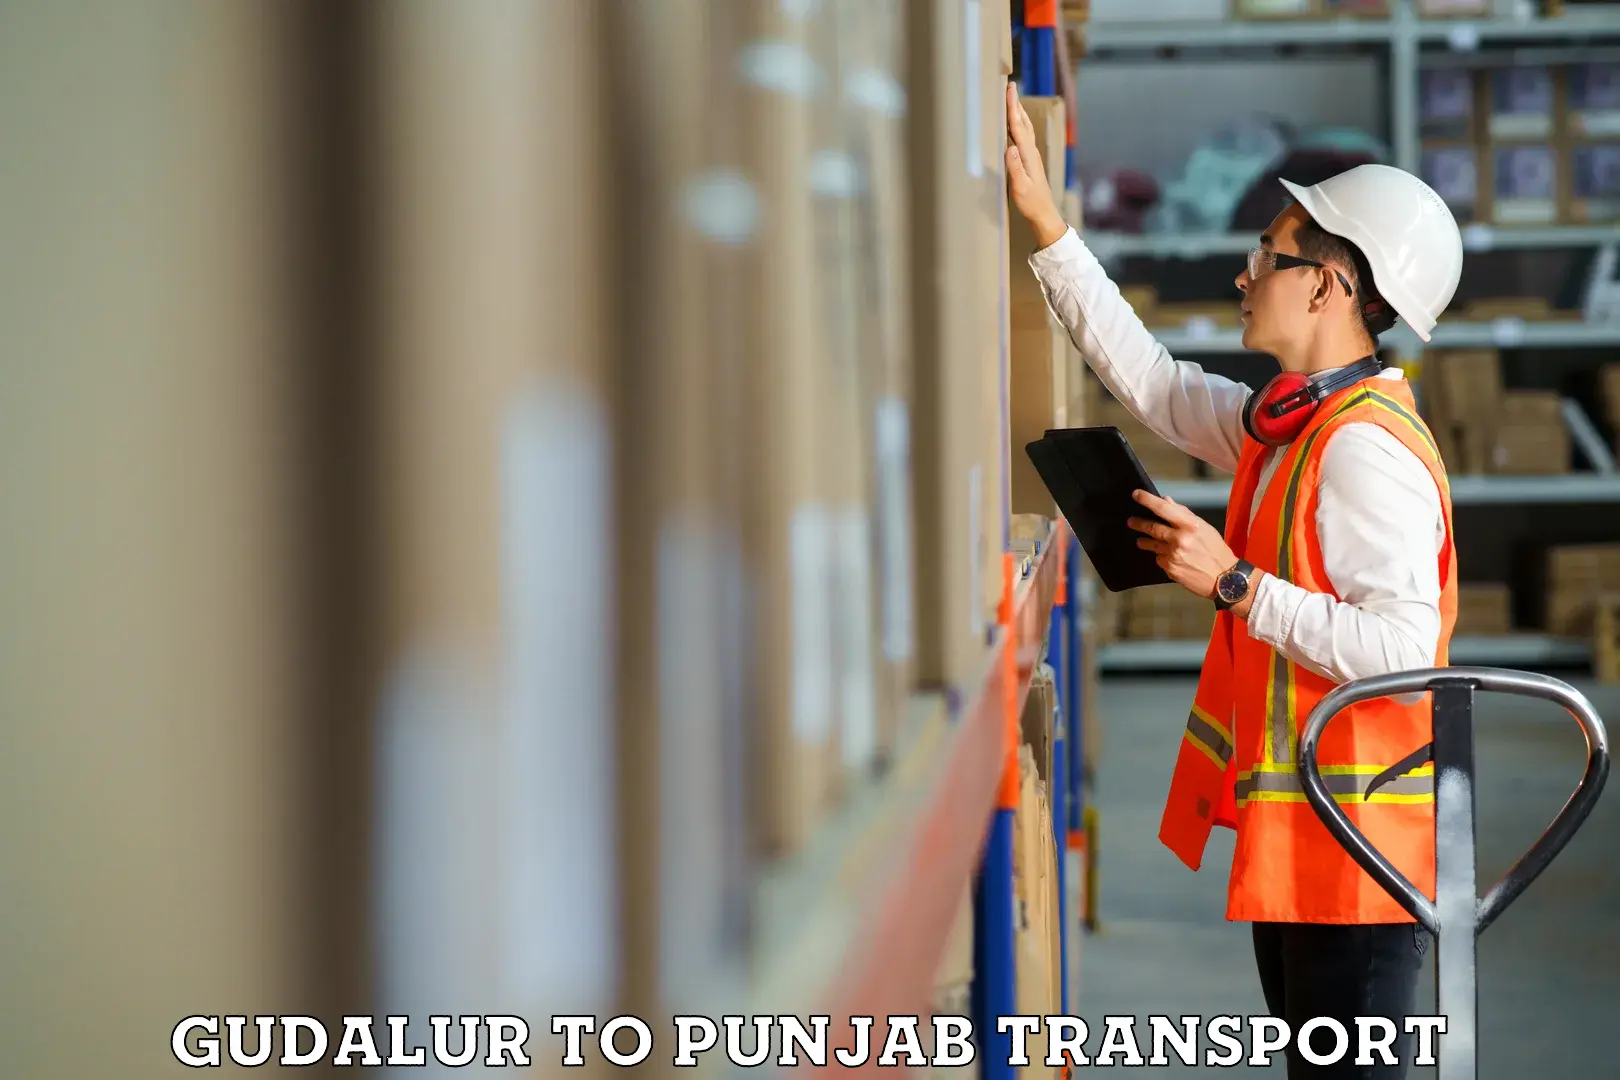 Commercial transport service Gudalur to Patiala